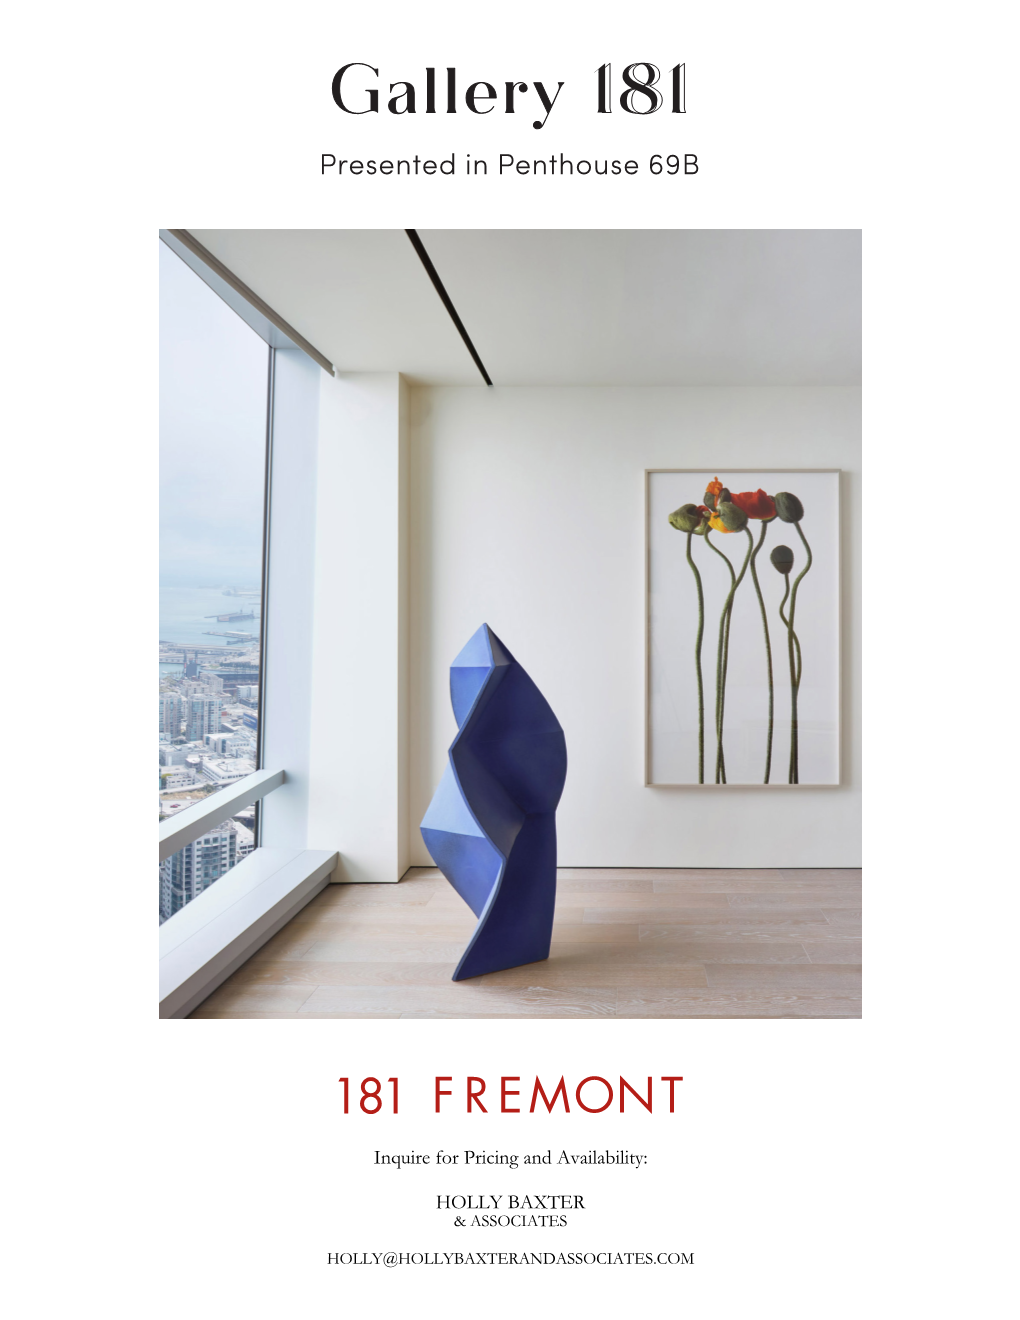 Gallery 181 Presented in Penthouse 69B